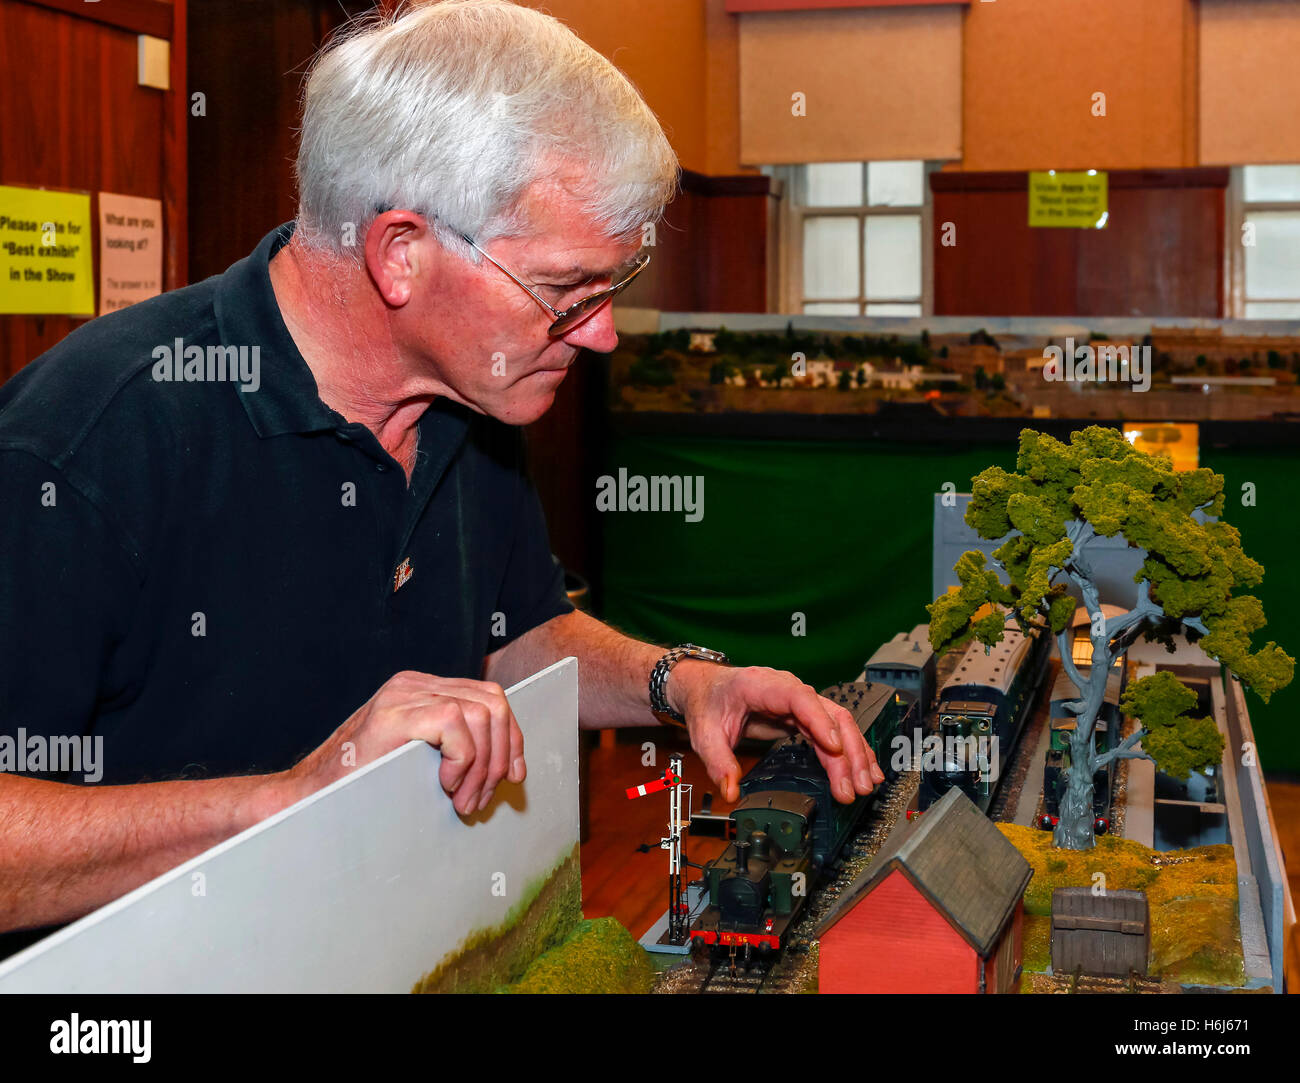 Glasgow, Scotland, UK. 29th October, 2016. On the opening day, of the two day annual Cathcart Model Railway more than a thousand model railway enthusiasts, with ages ranging from 18 months to 100 years old, came to view the railway layouts in various guages and era.ALISTAIR MacKAY from Glasgow is setting up his 'O' guage display Credit:  Findlay/Alamy Live News Stock Photo